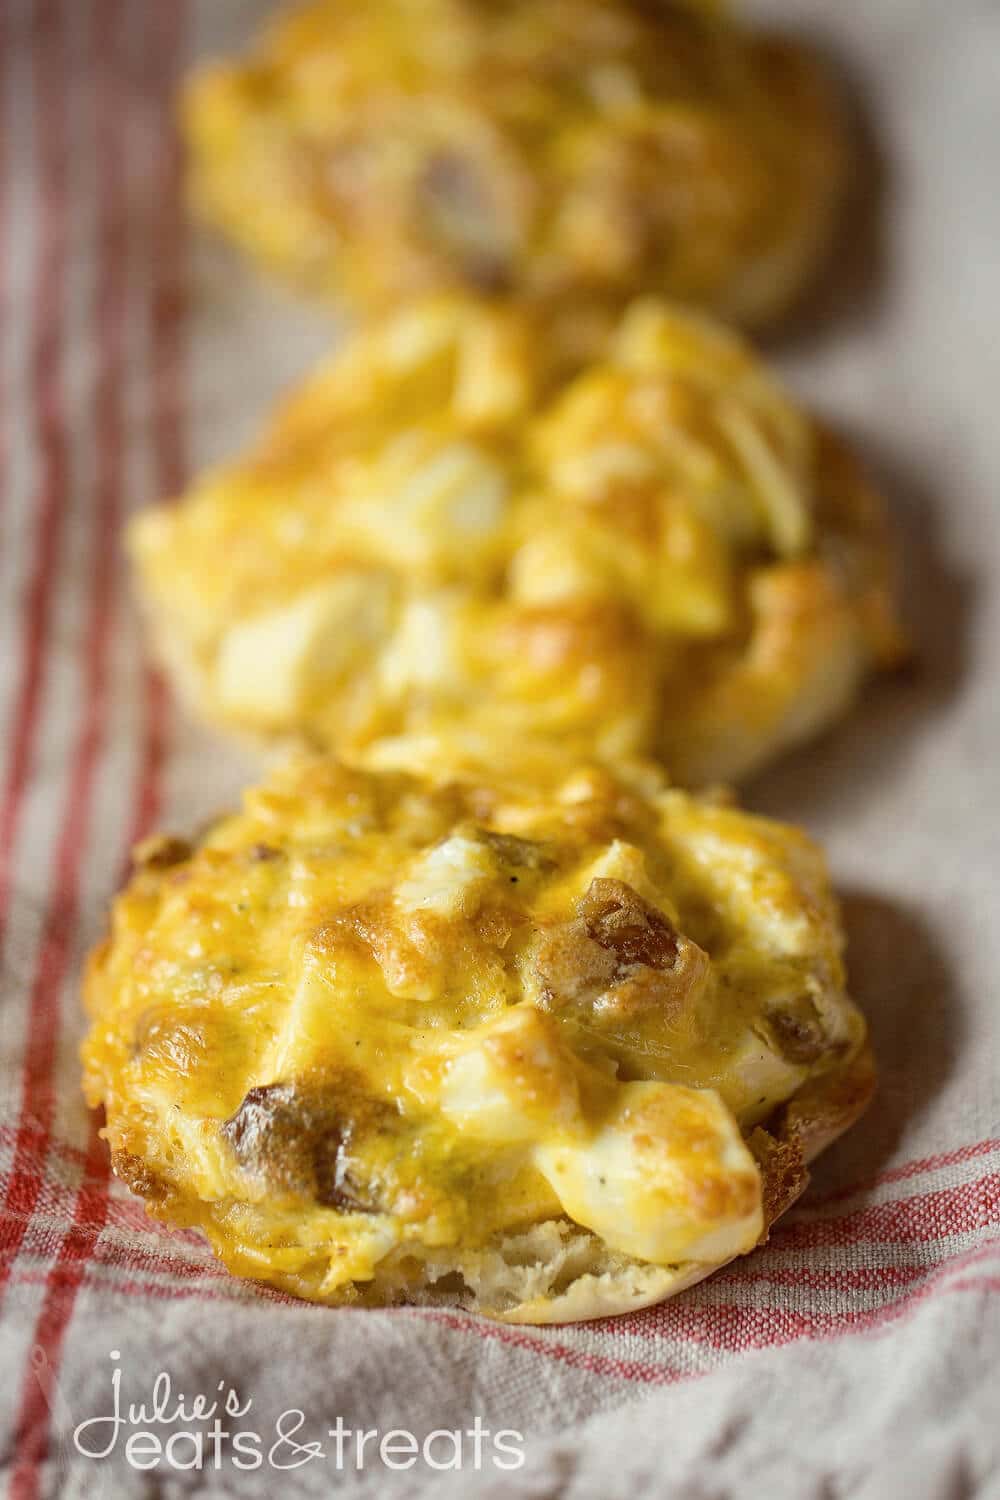 English Muffin Breakfast ~ Melted Cheese, Warm Eggs and Bacon Piled on an English Muffin! Make Them Ahead, Warm Up and it's the Perfect Grab and Go Breakfast for on the Run!